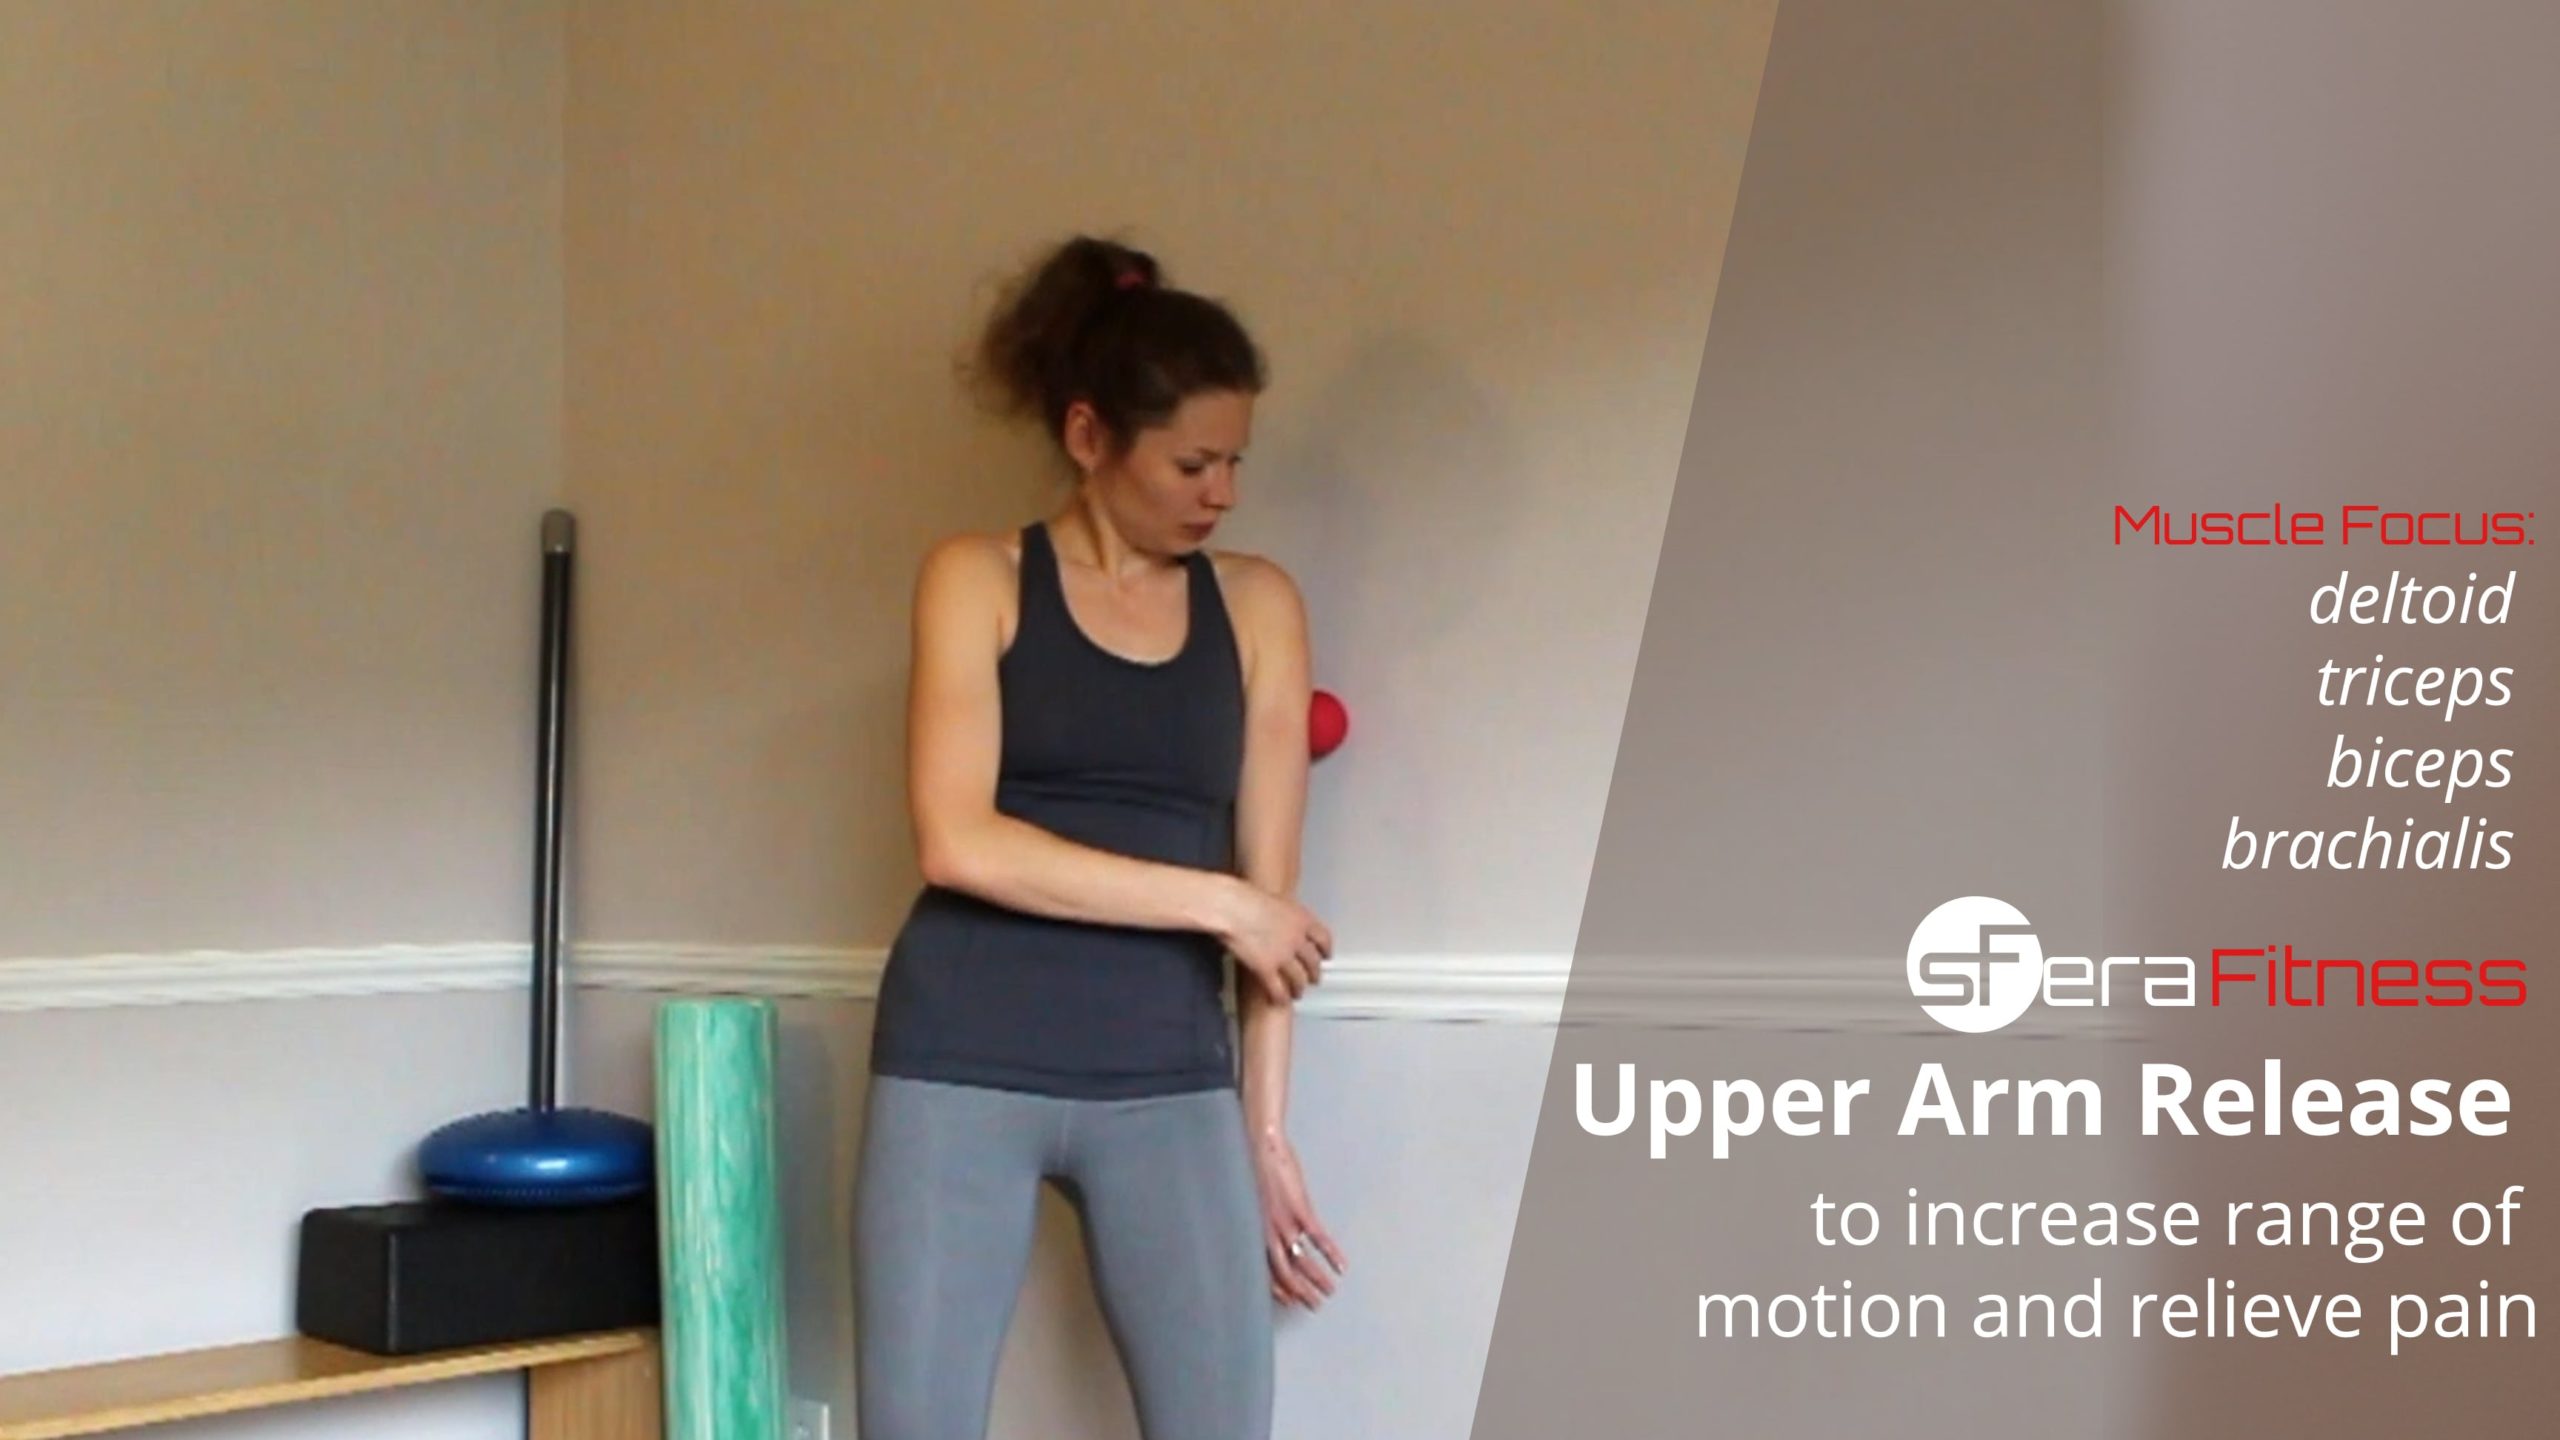 Upper Arm Myofascial and Trigger Point Release to Increase Range of Motion and Relieve Pain